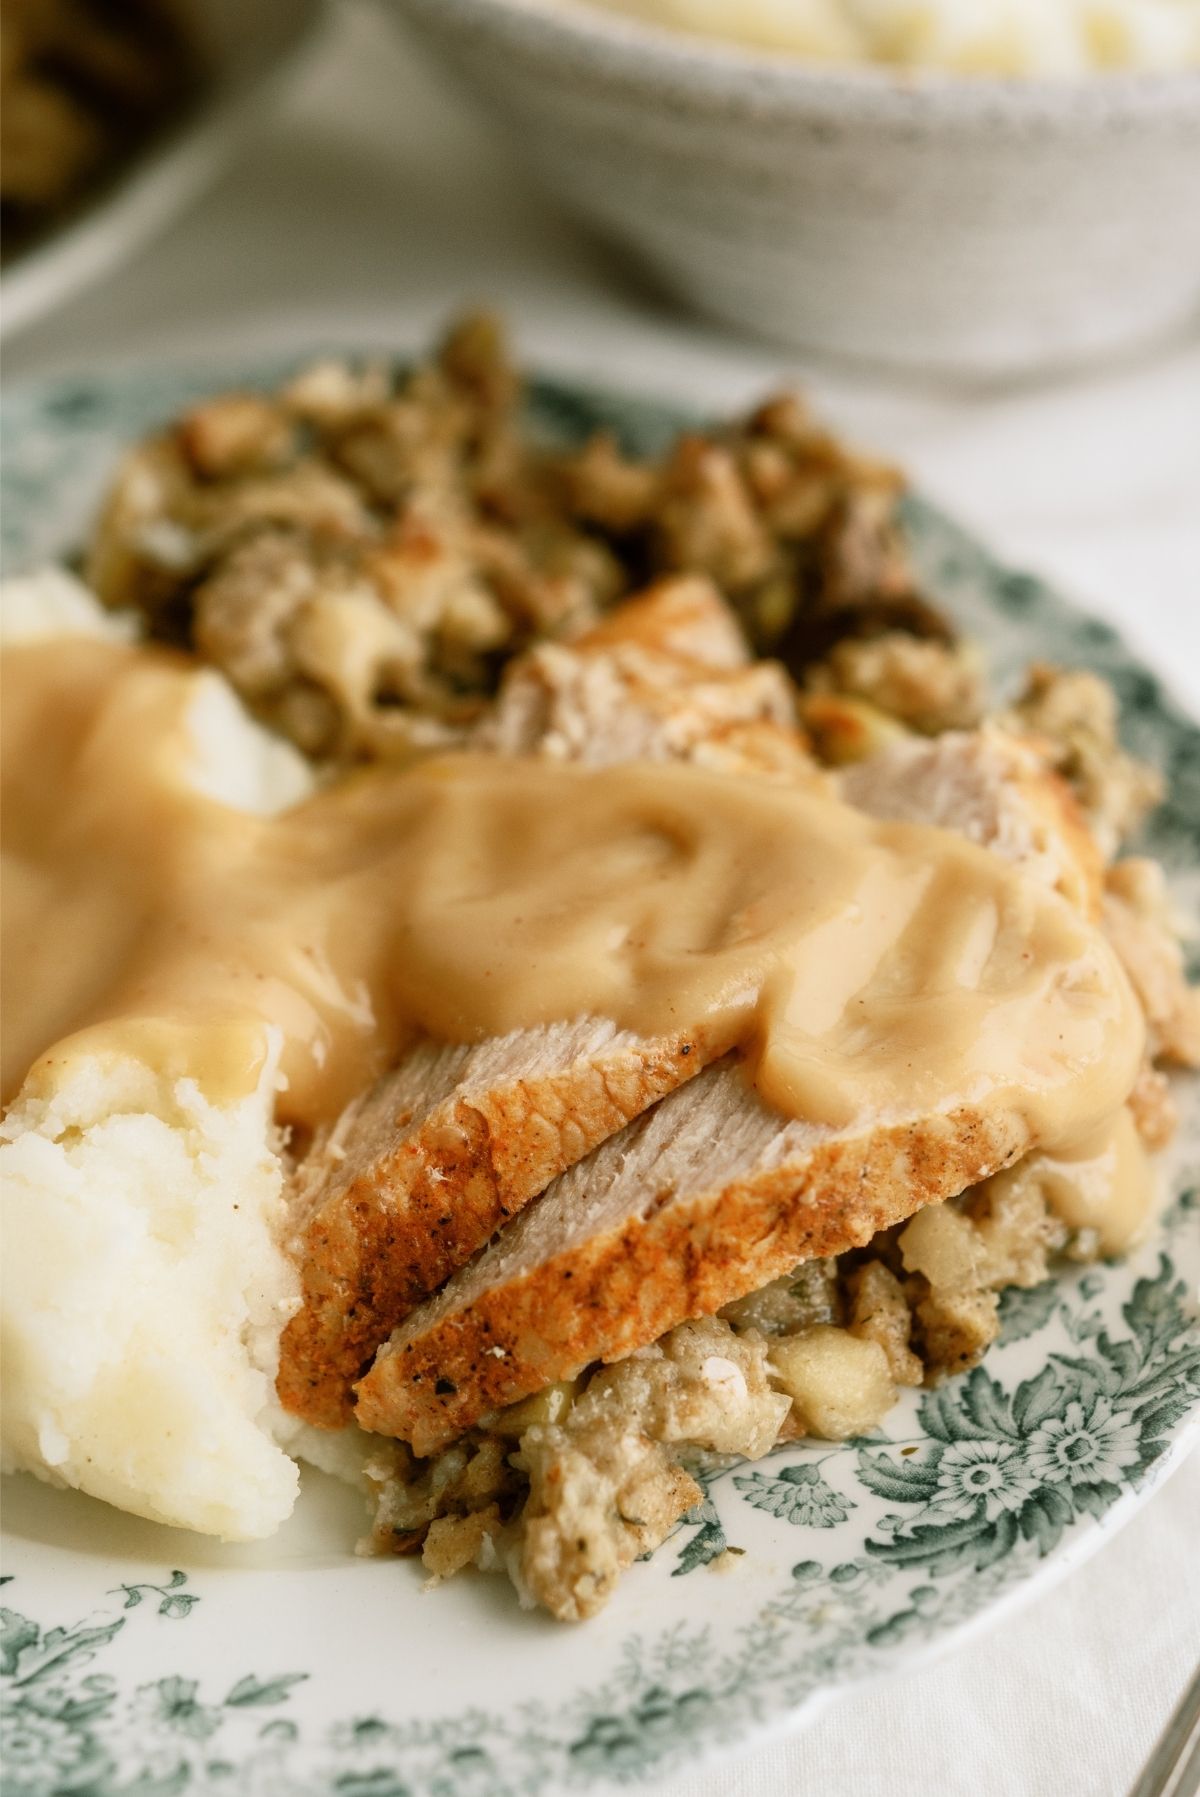 Slow Cooker Turkey and Stuffing with mashed potatoes on a plate